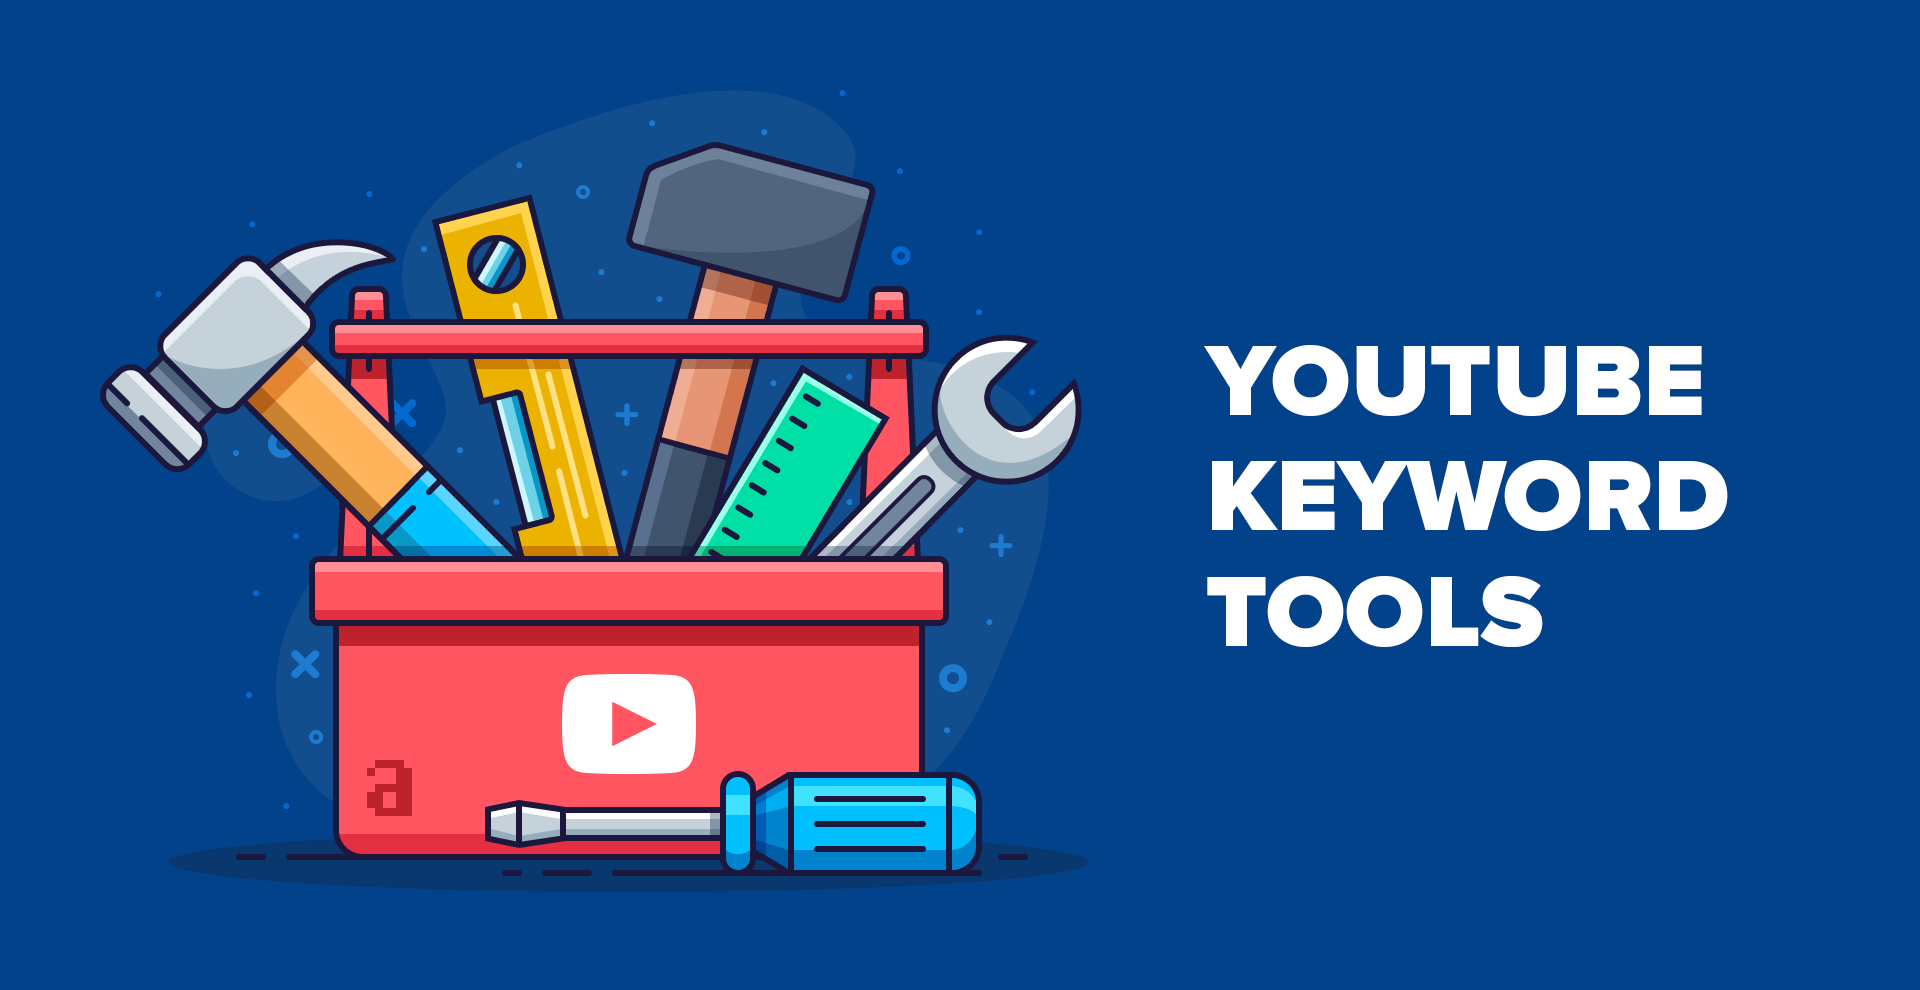 There are tons of free and paid tools to help you find the best keywords for YouTube videos.